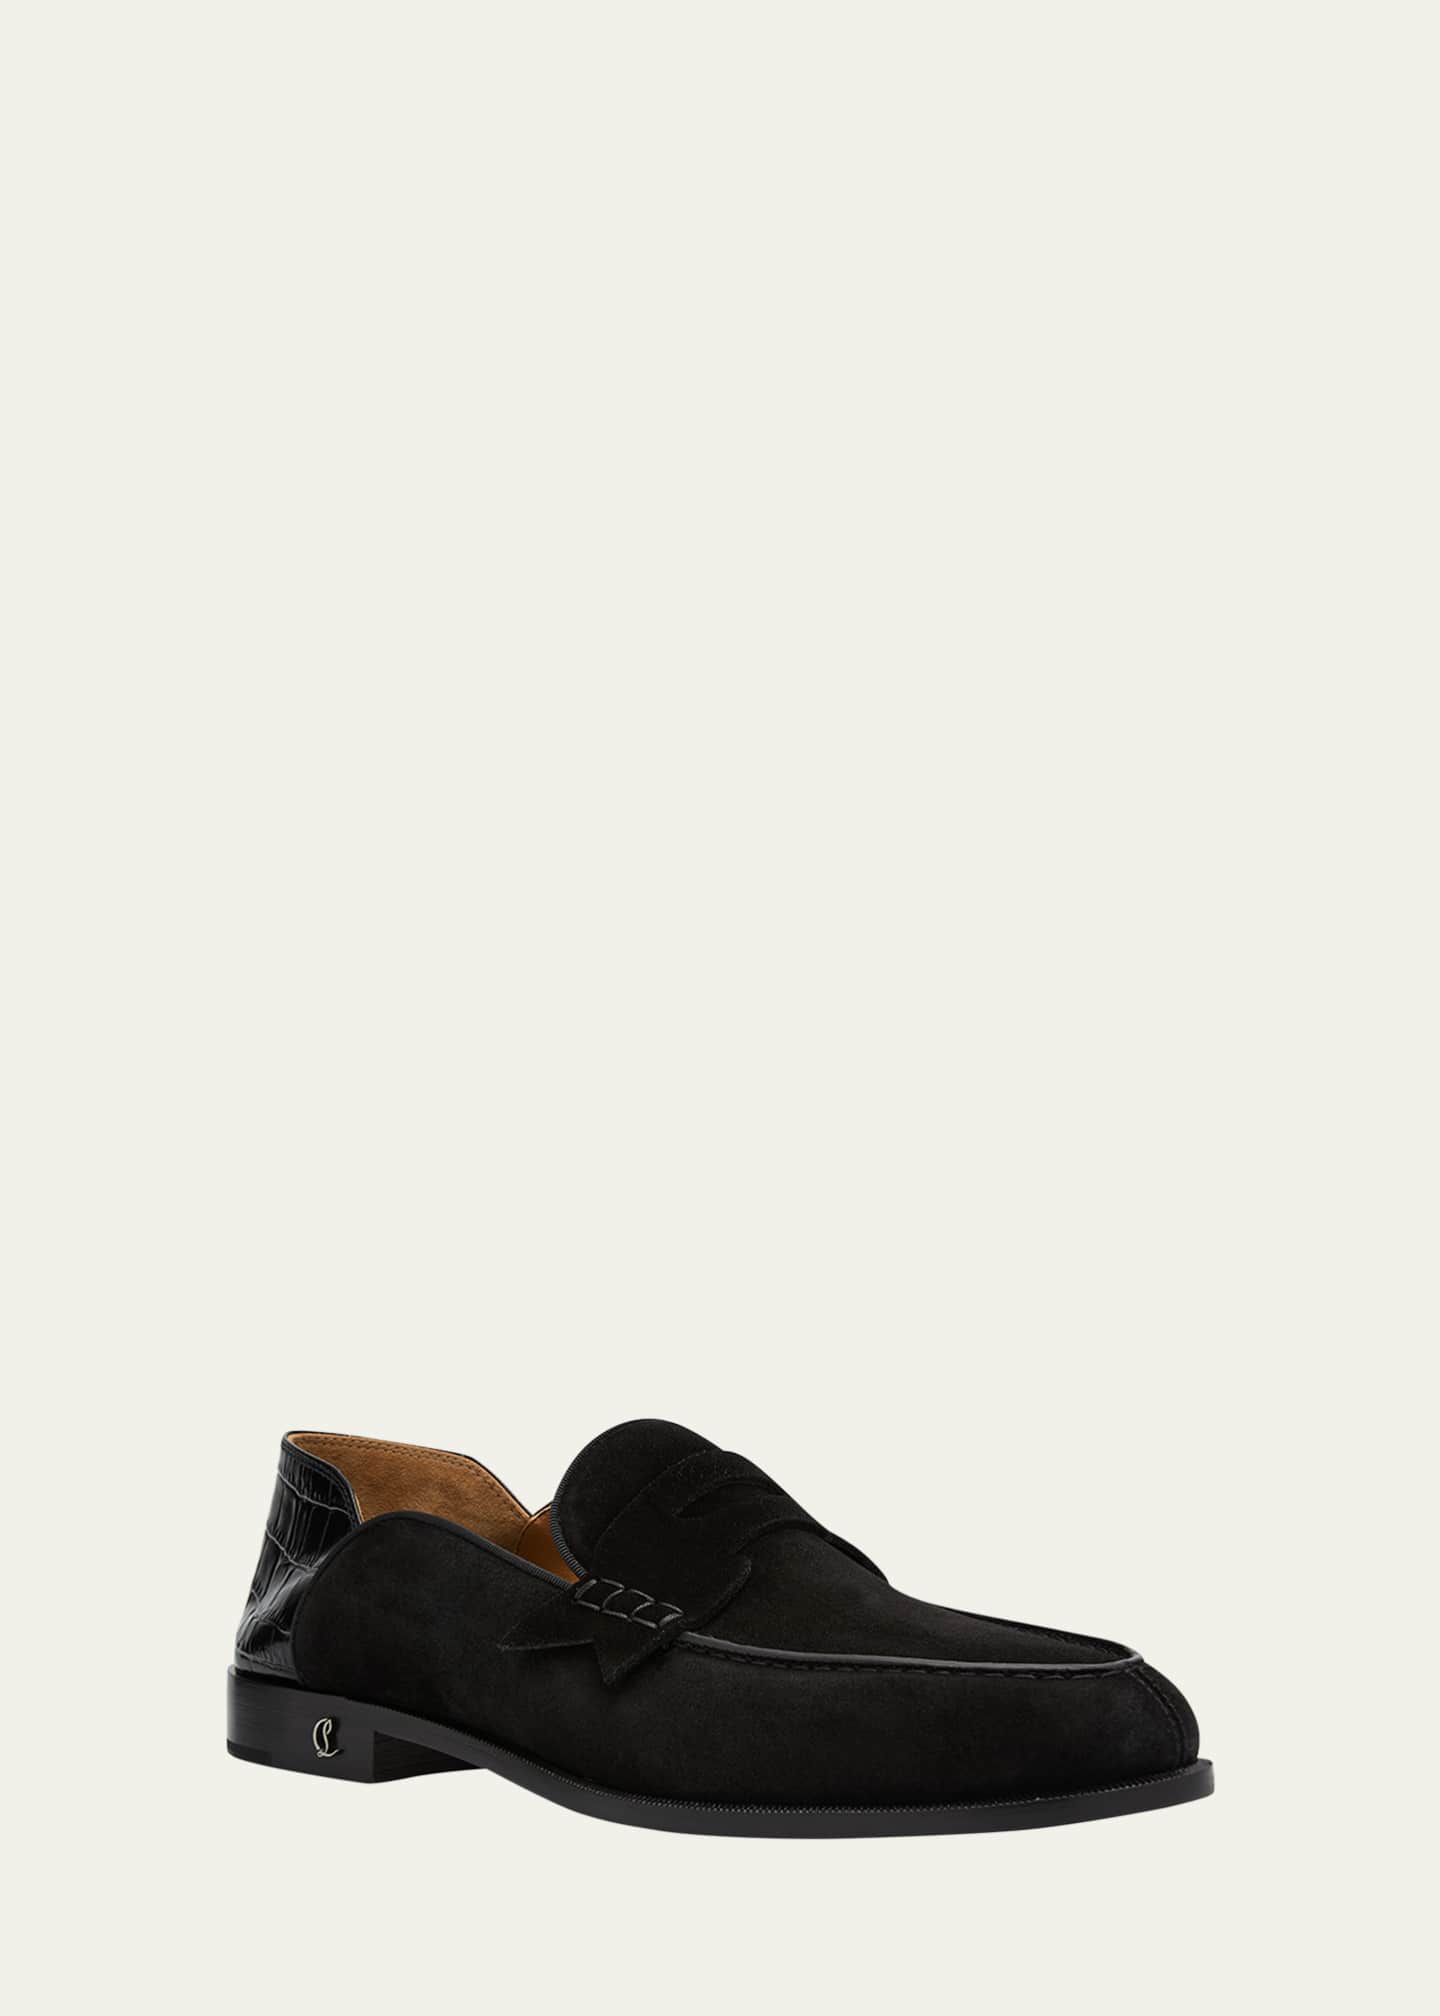 Christian Louboutin Men's Penny No Back Suede Loafers